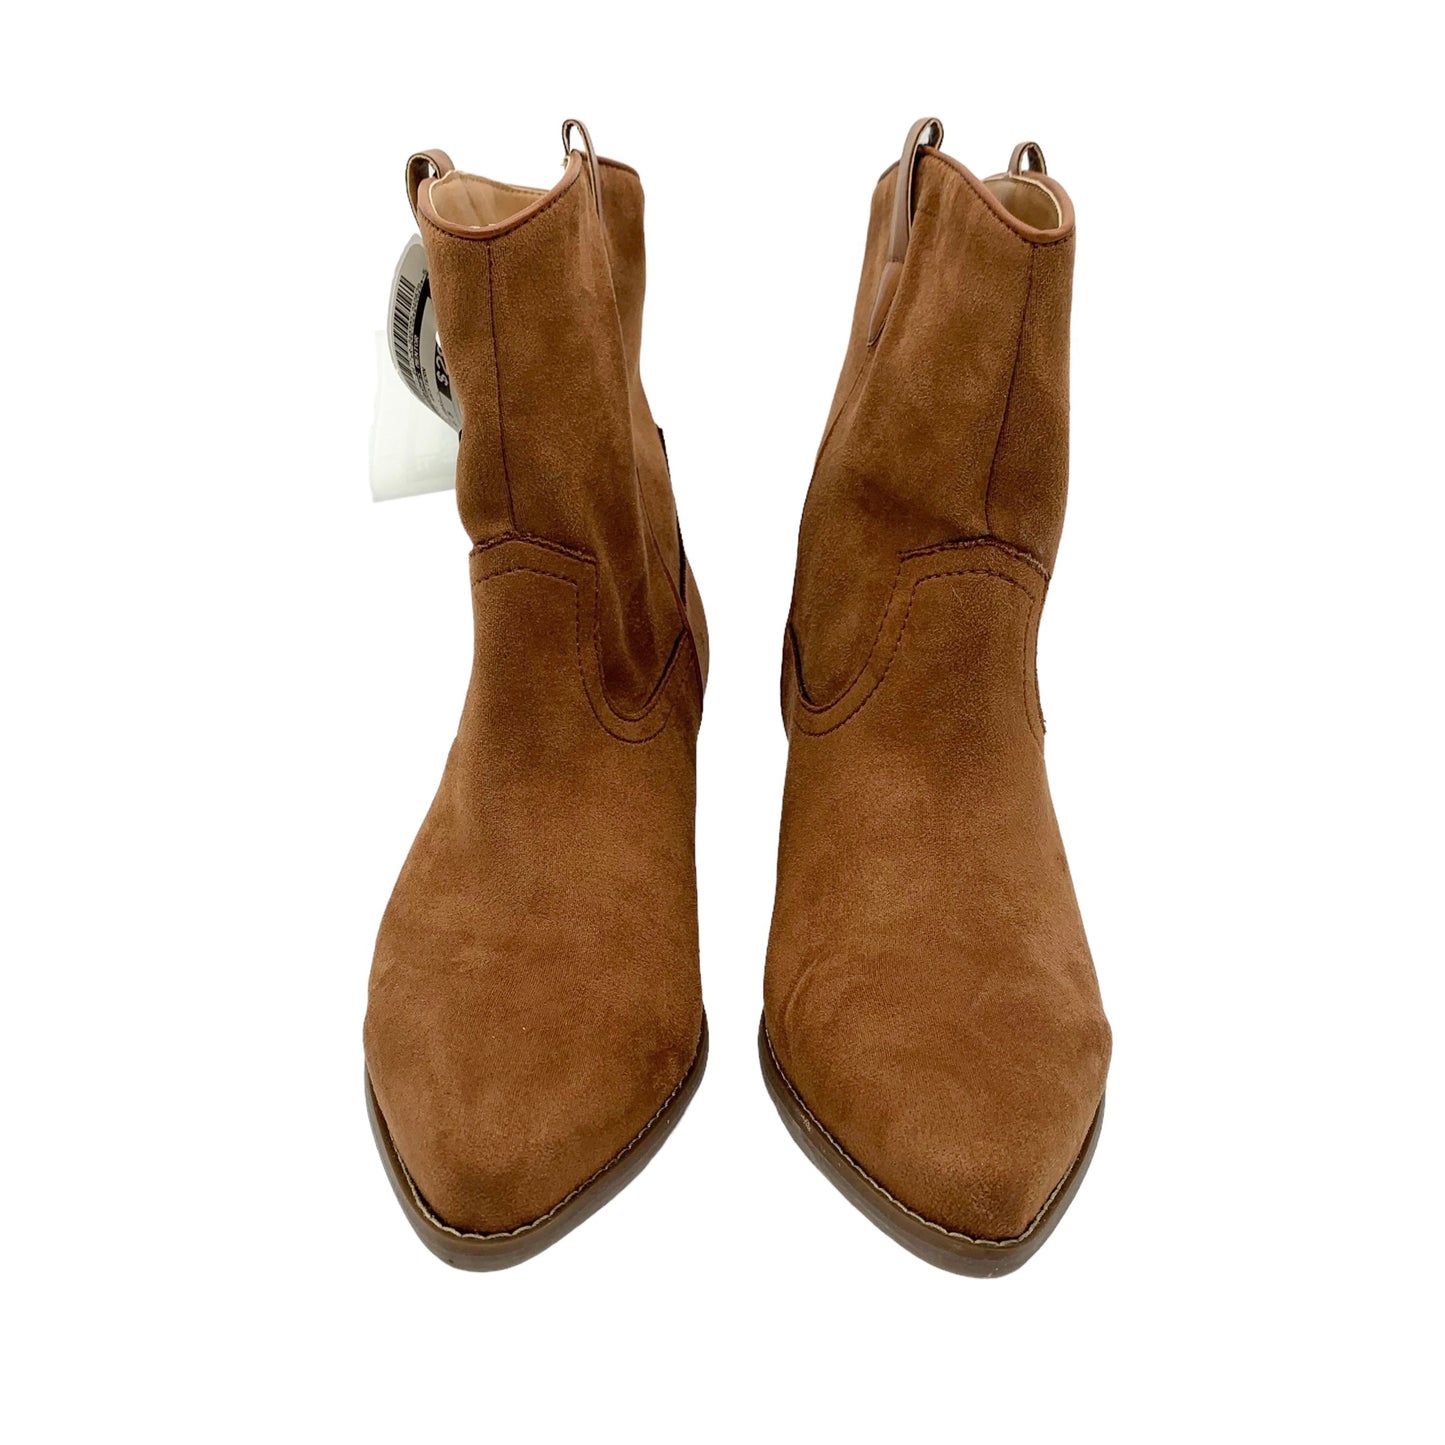 Tan Boots Western Code West, Size 9.5